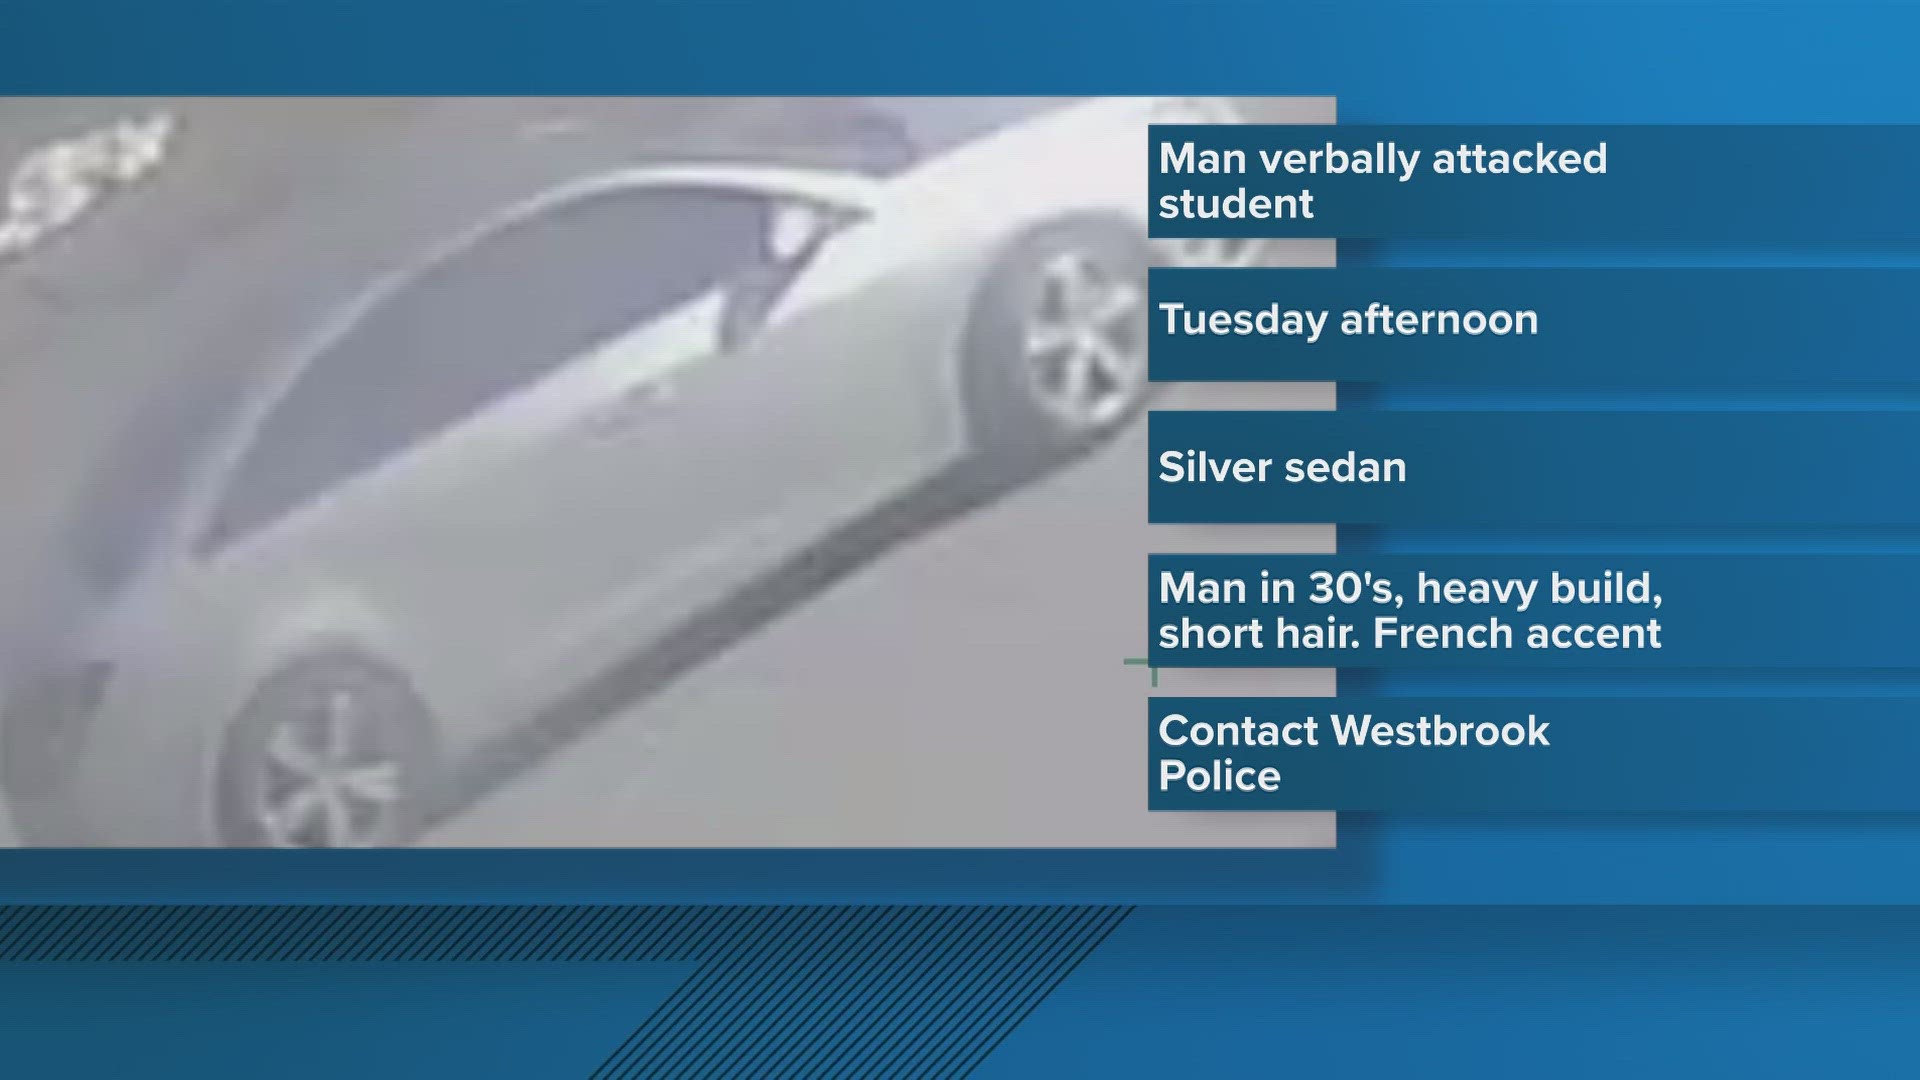 Police say the incident started Tuesday afternoon along Monroe Avenue, when a man in a car started following a student before verbally attacking her.